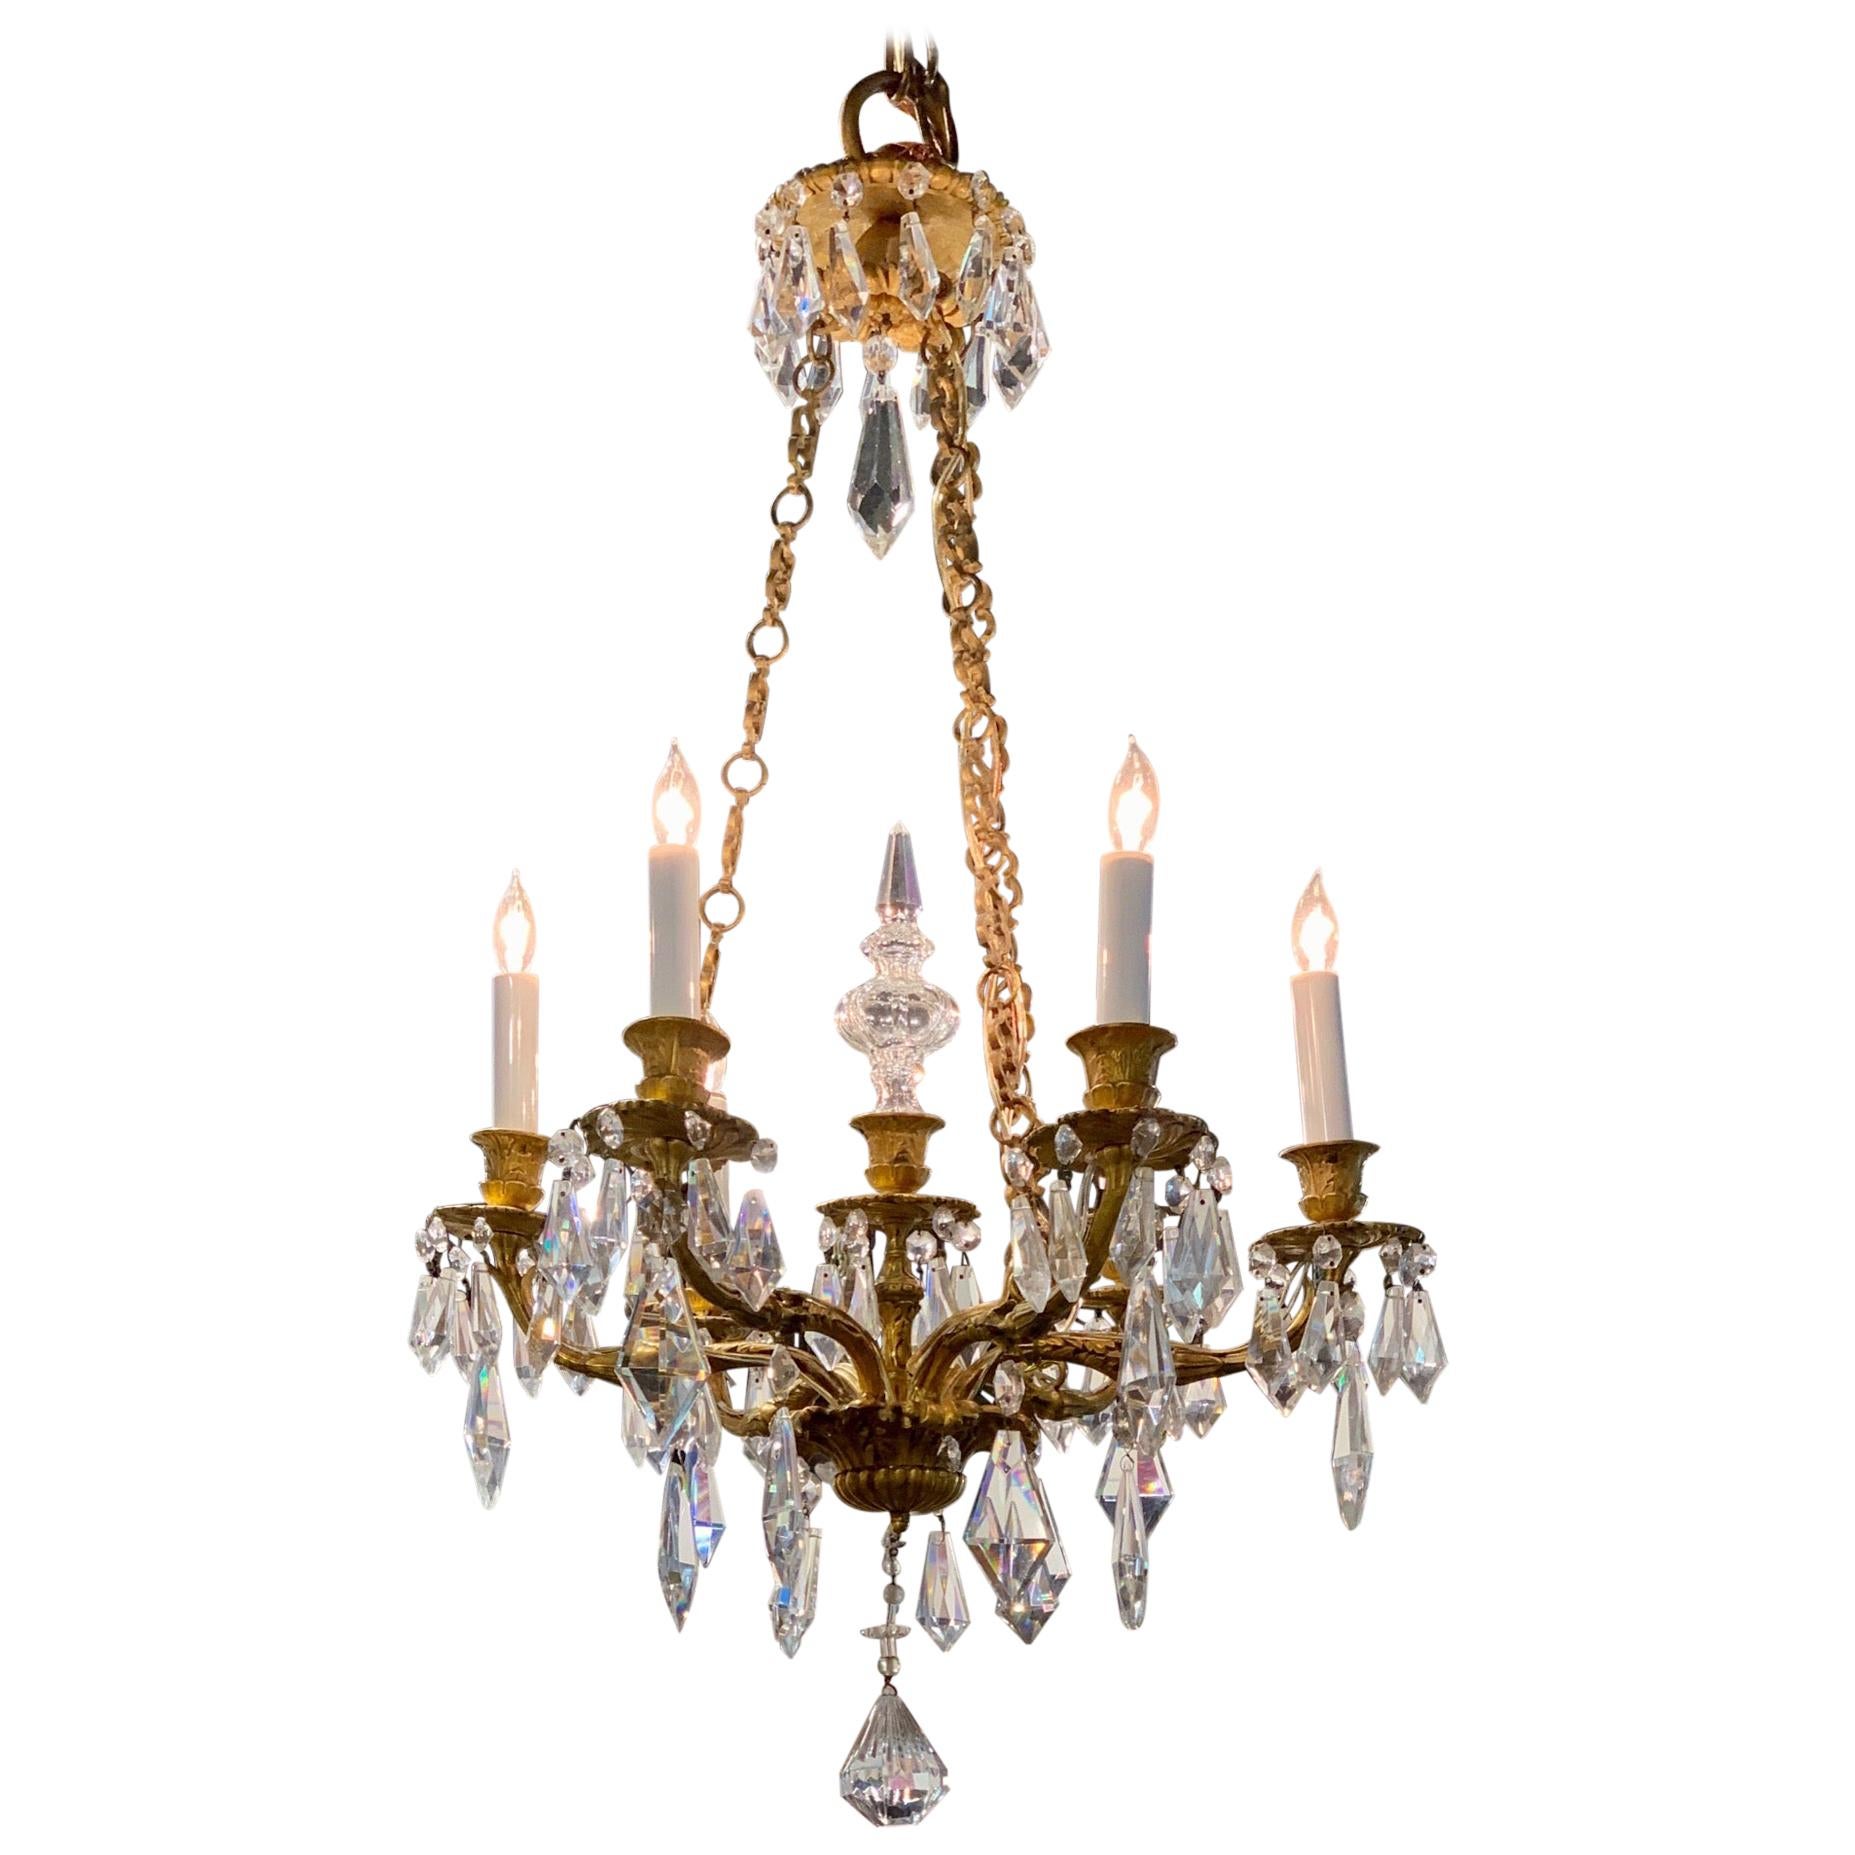 19th Century French Louis XVI Style Gilt Bronze and Crystal Chandelier